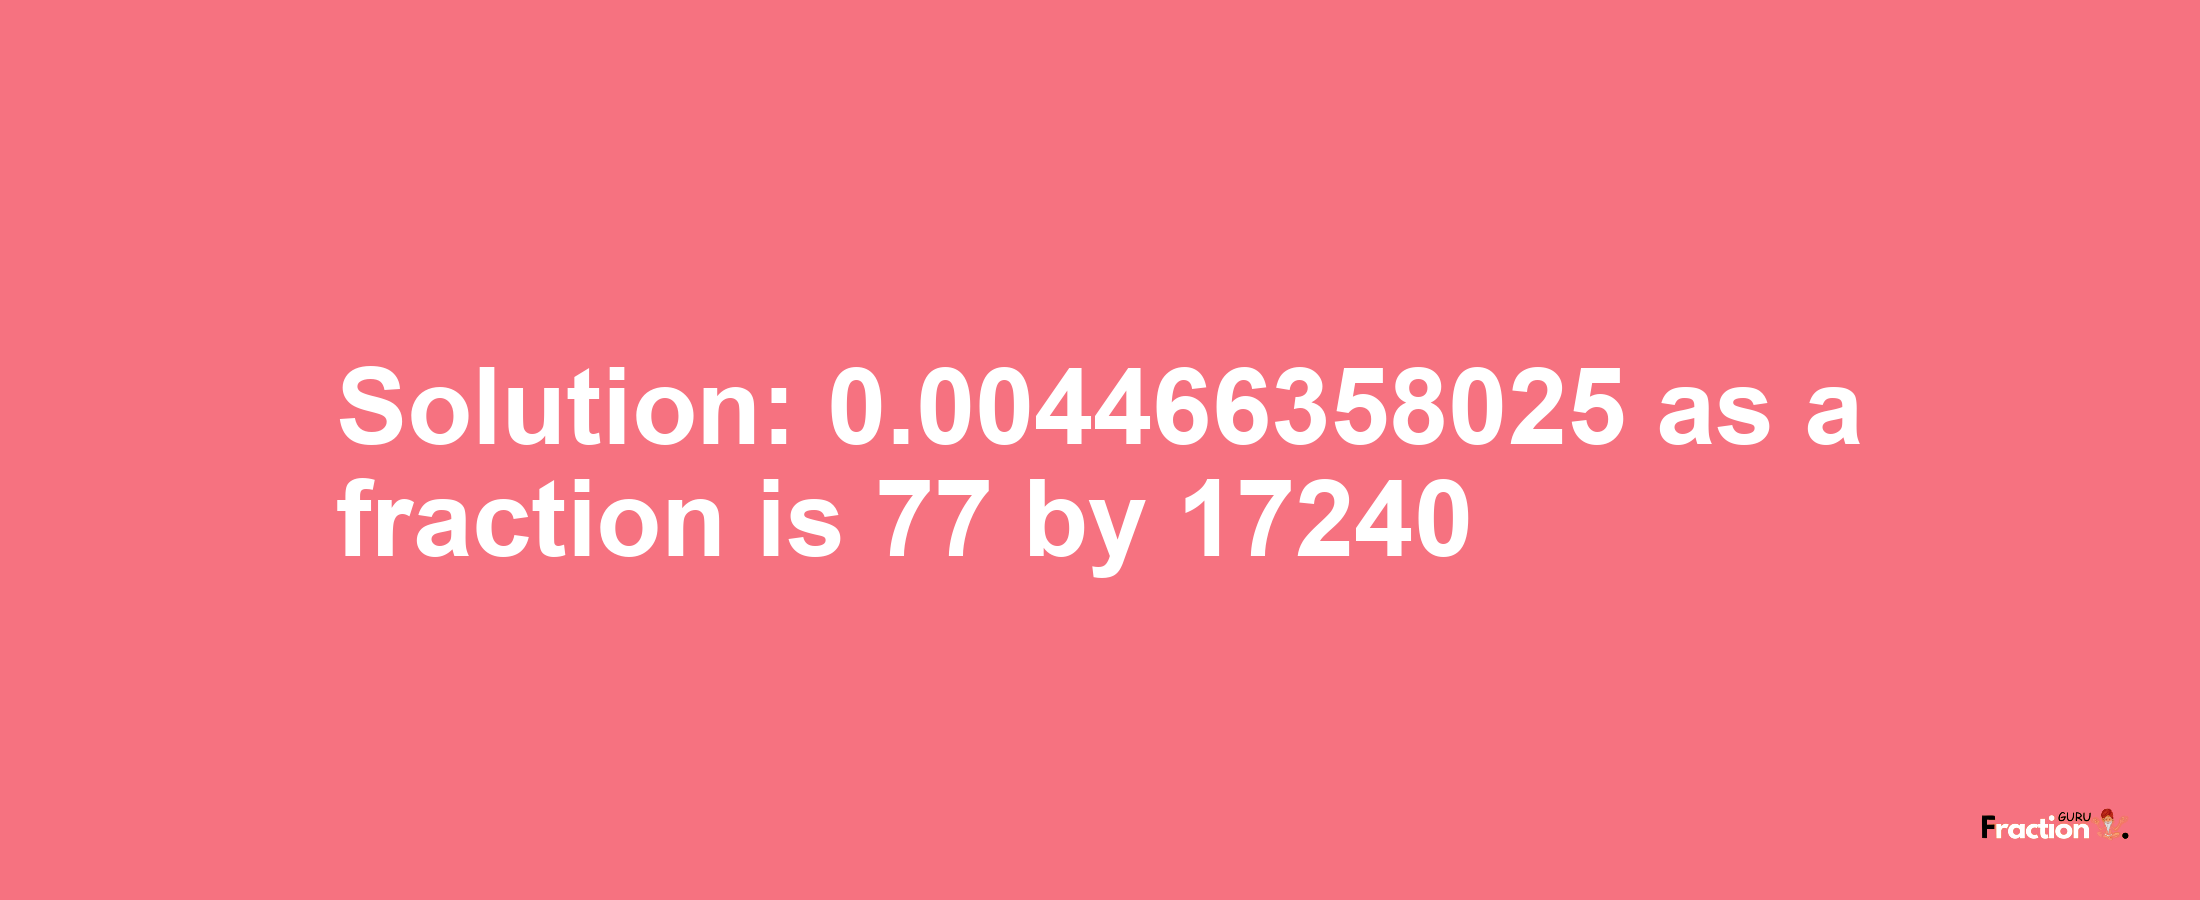 Solution:0.004466358025 as a fraction is 77/17240